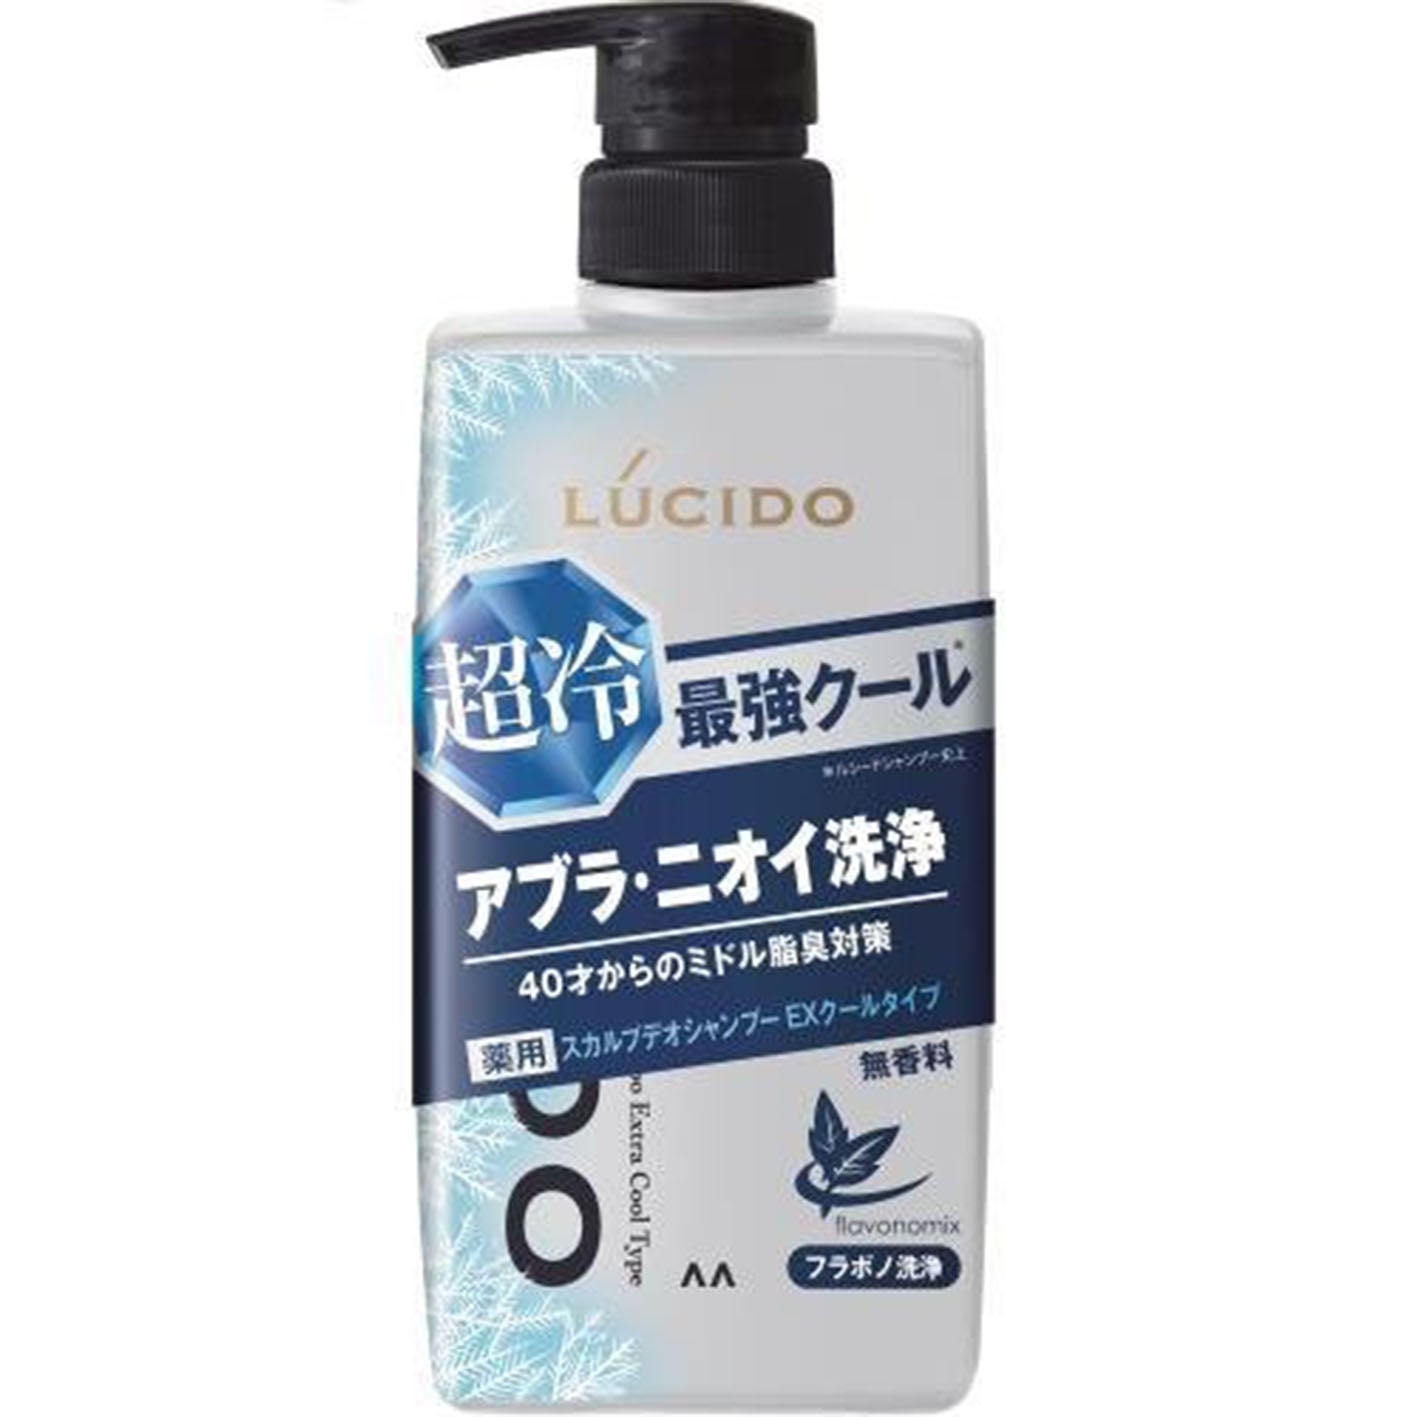 Lucido Medicated Scalp Deo Shampoo EX Cool Type 450ml - Harajuku Culture Japan - Japanease Products Store Beauty and Stationery